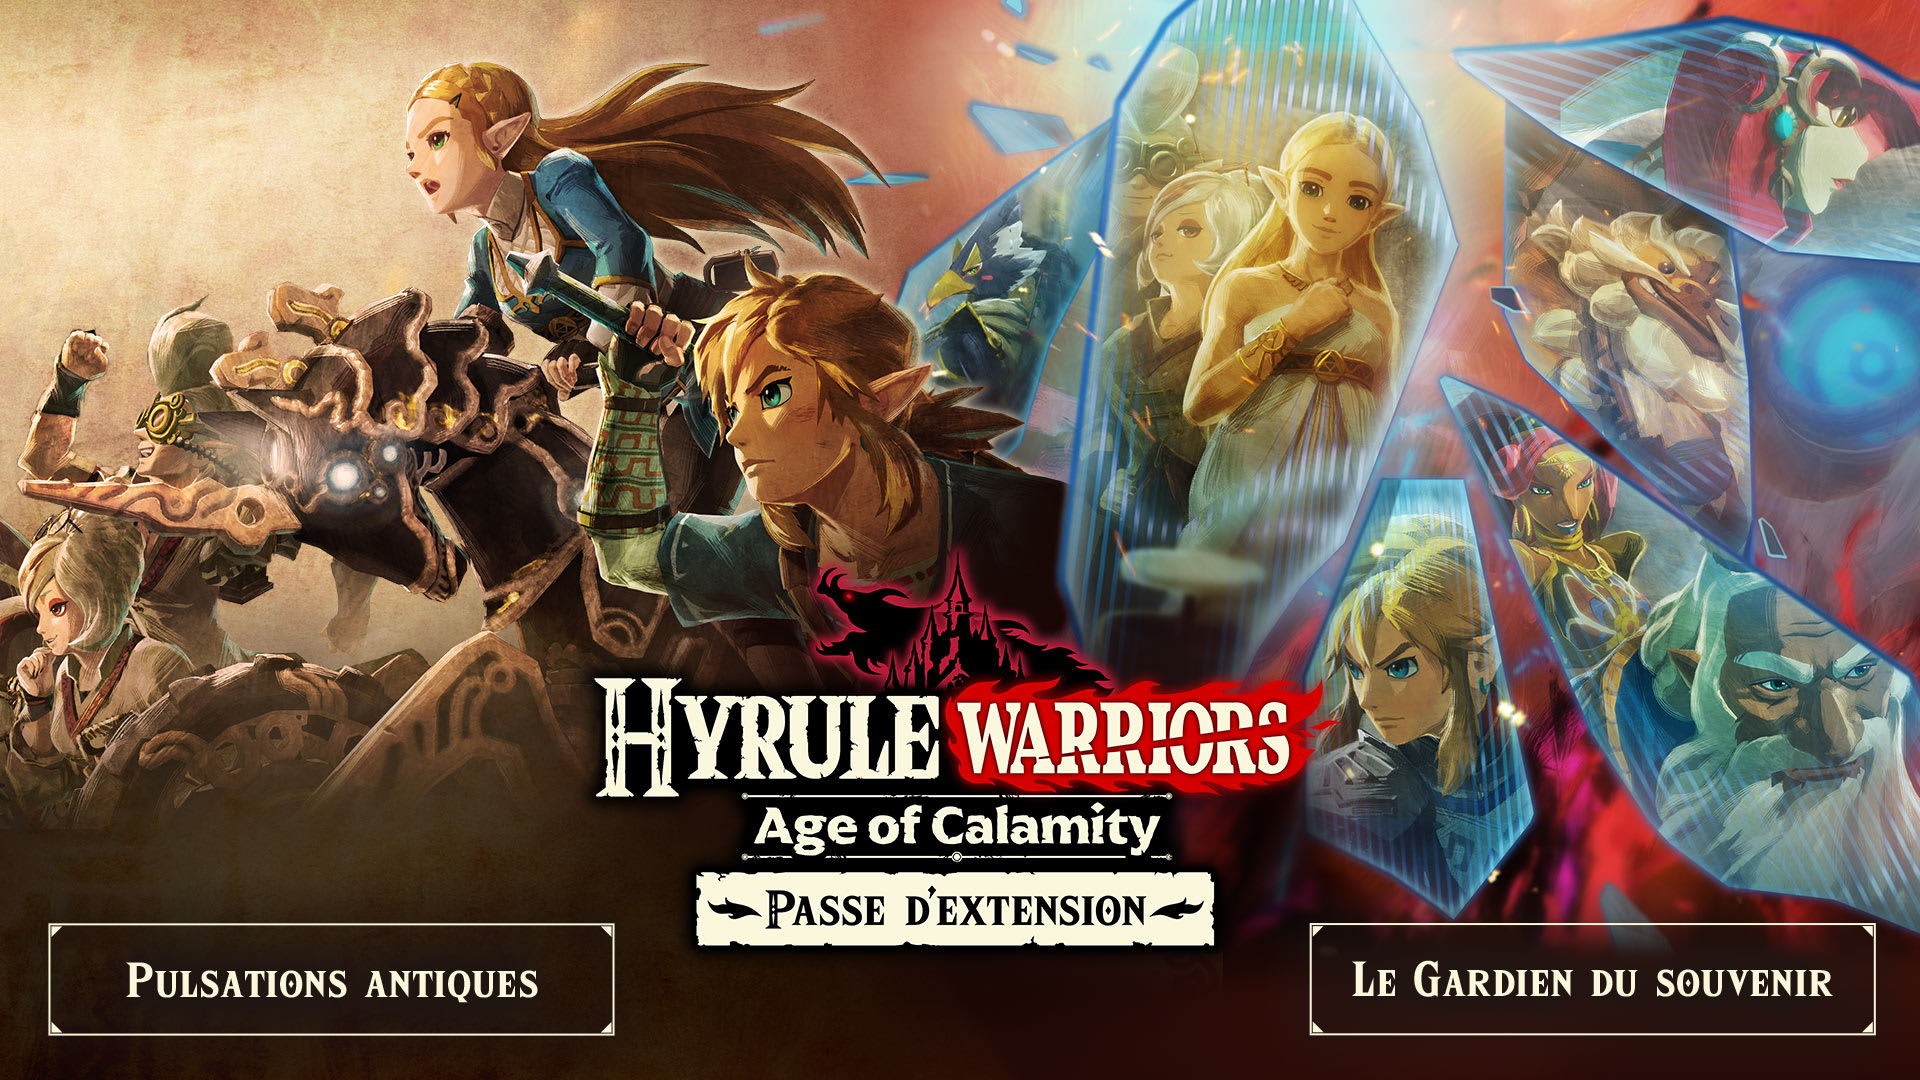 Hyrule Warriors: Age of Calamity Passe d’extension